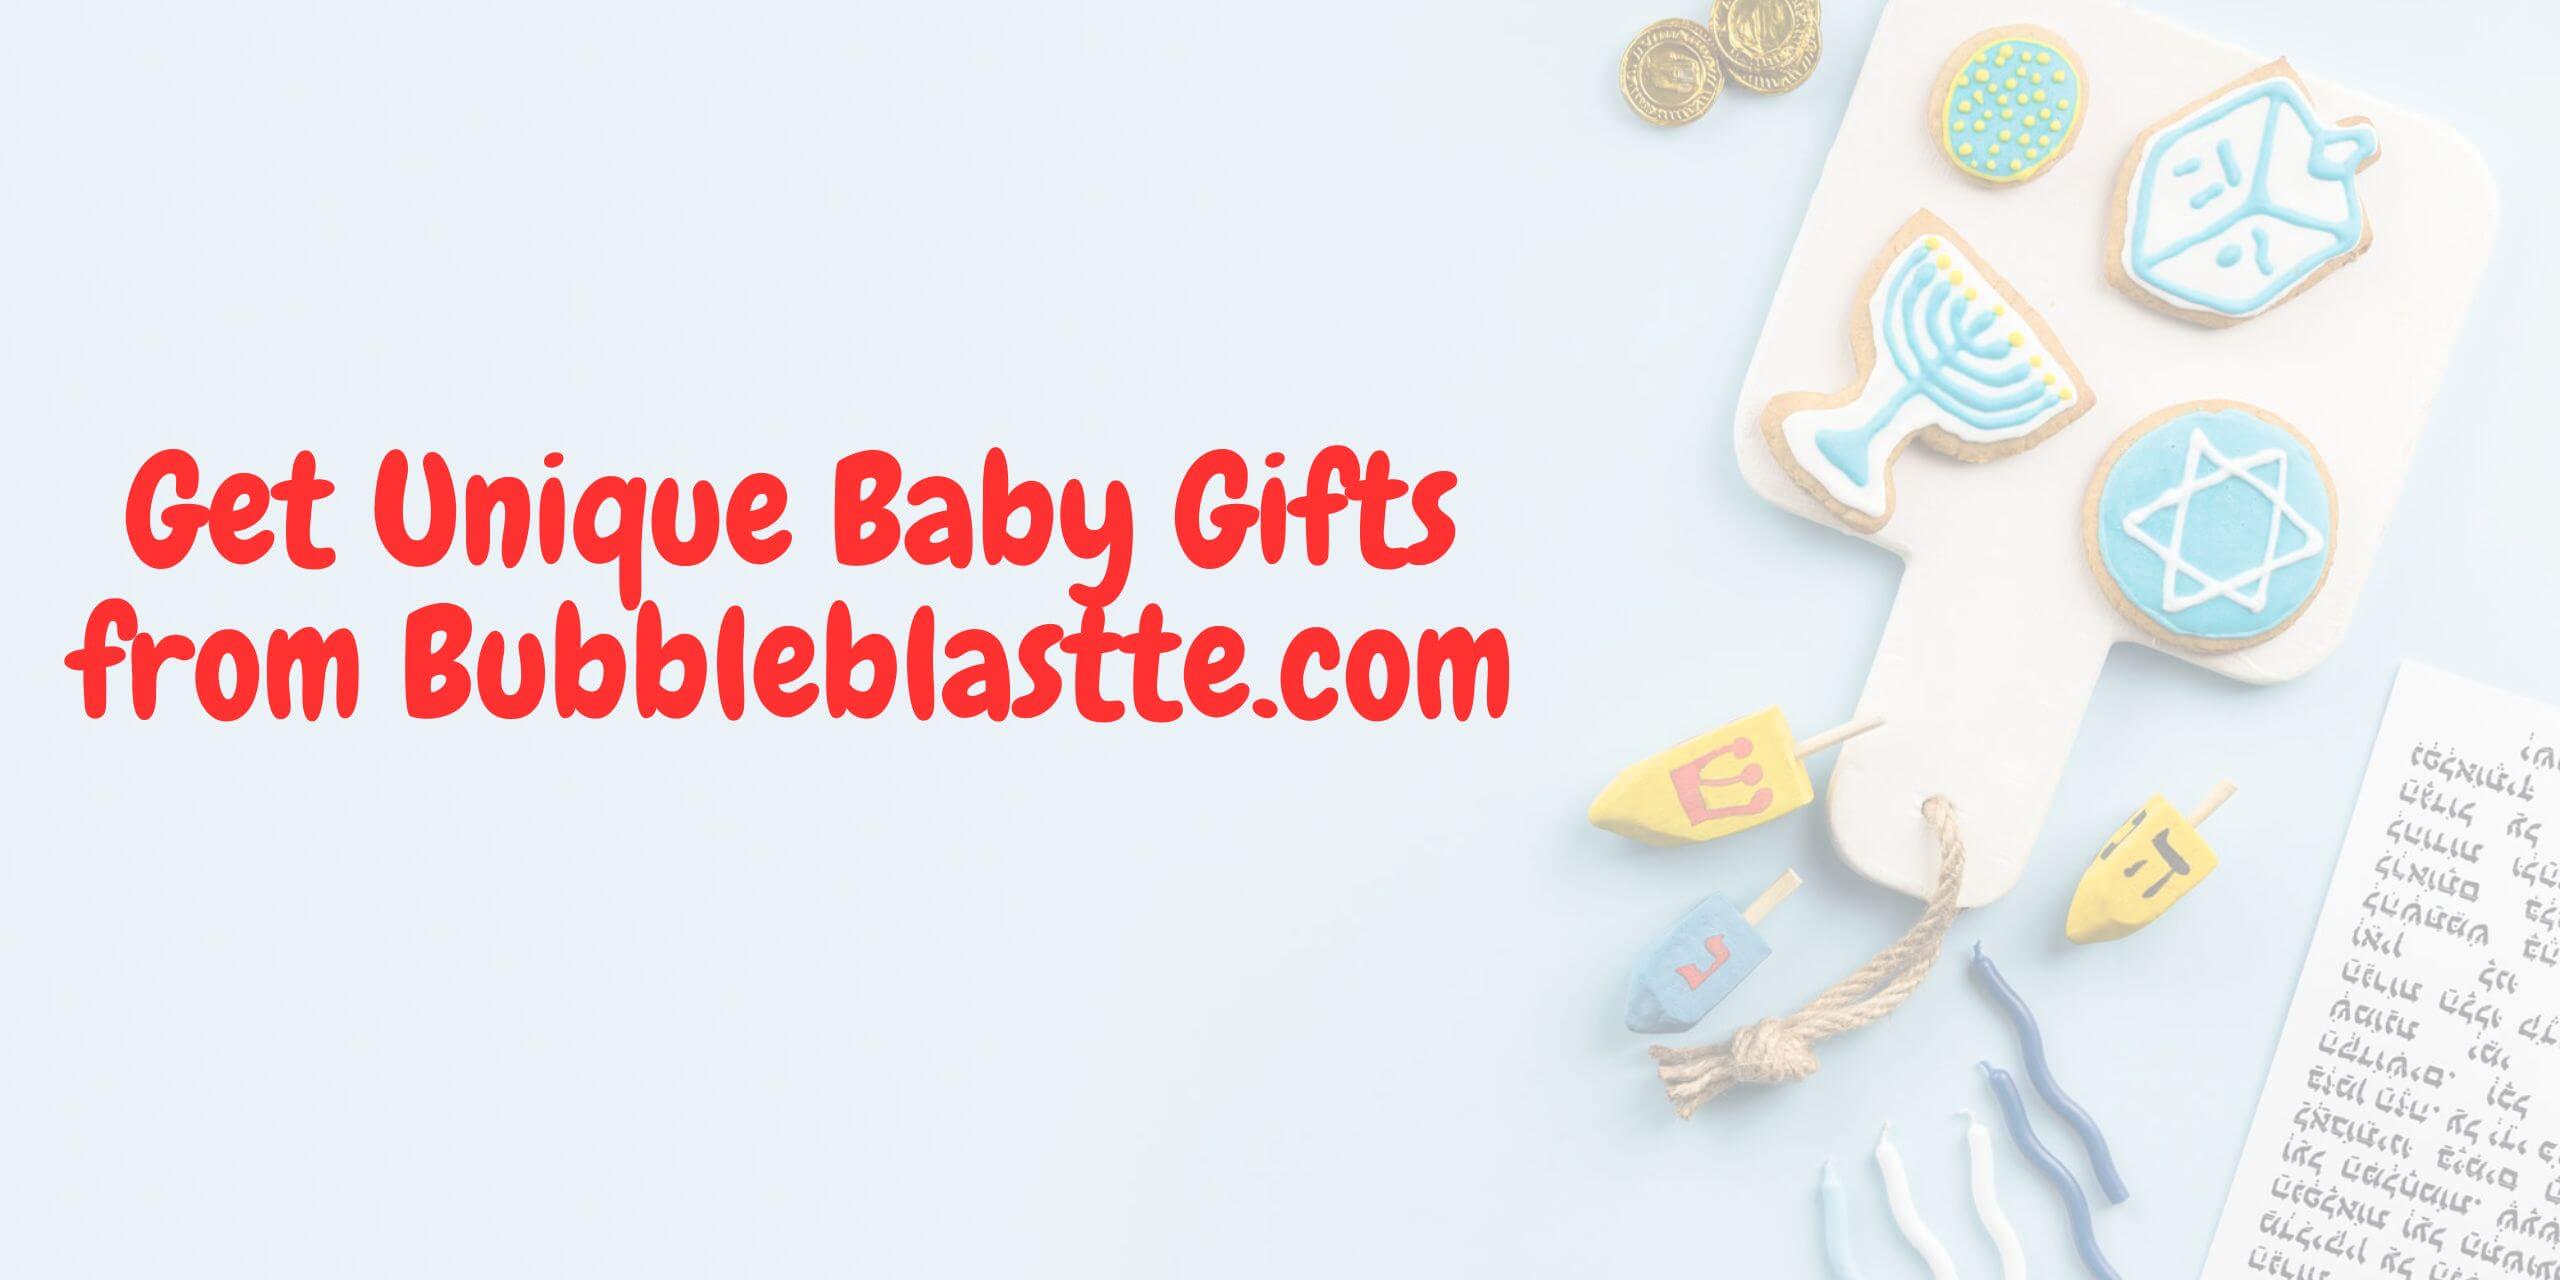 New Baby Gifts from Bubbleblastte.com